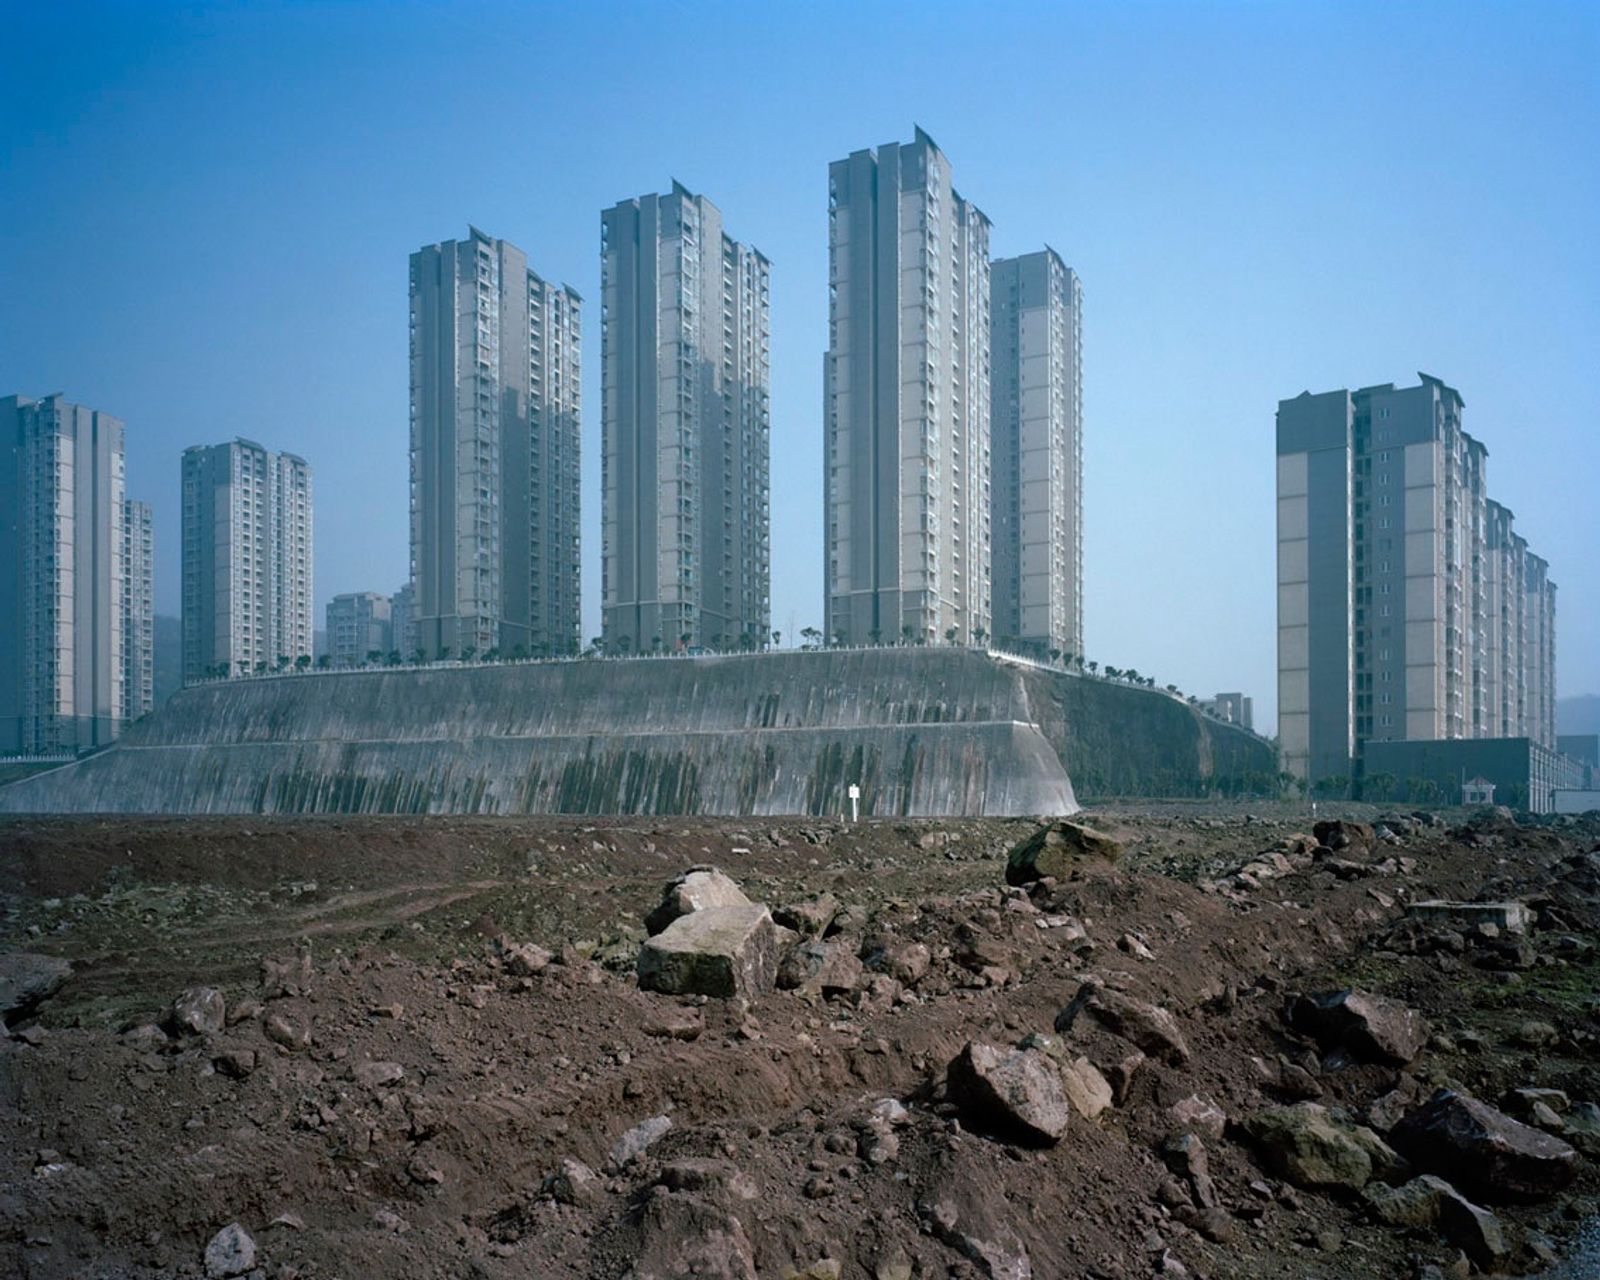 © Julien Chatelin, from the series, China West